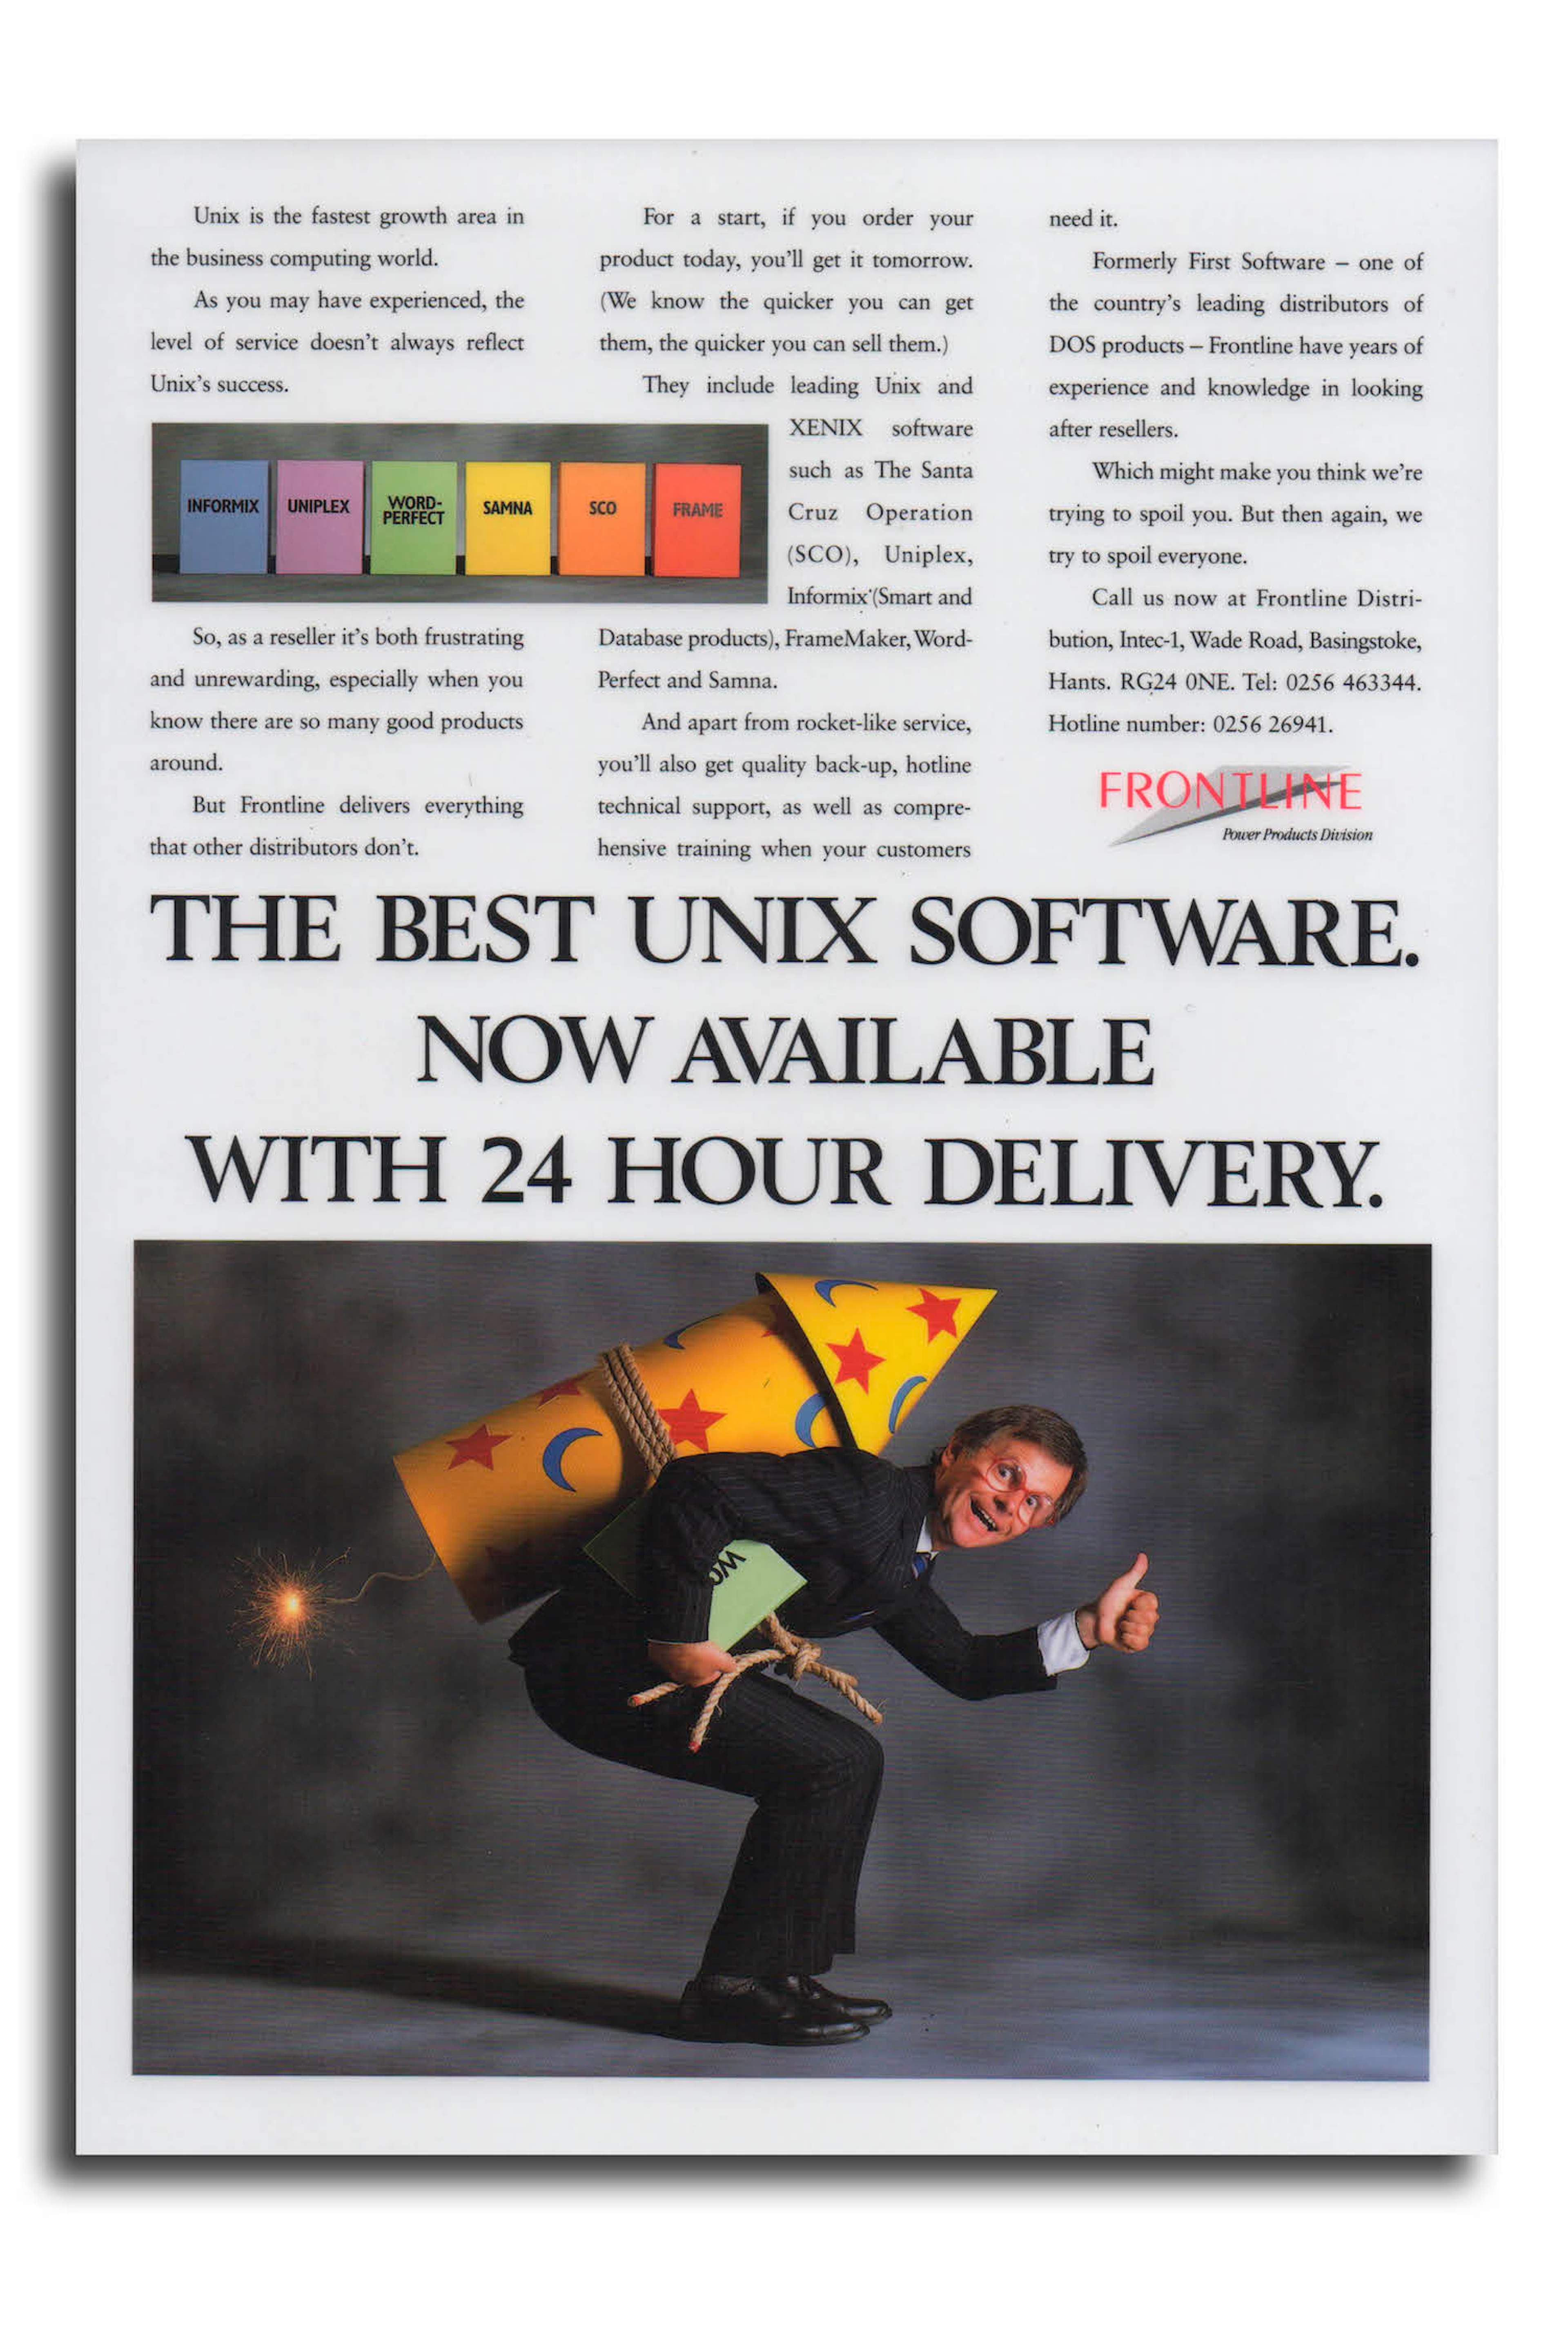 Photo of a man strapped to a rocket showing fast 24 hour delivery for Frontline. 